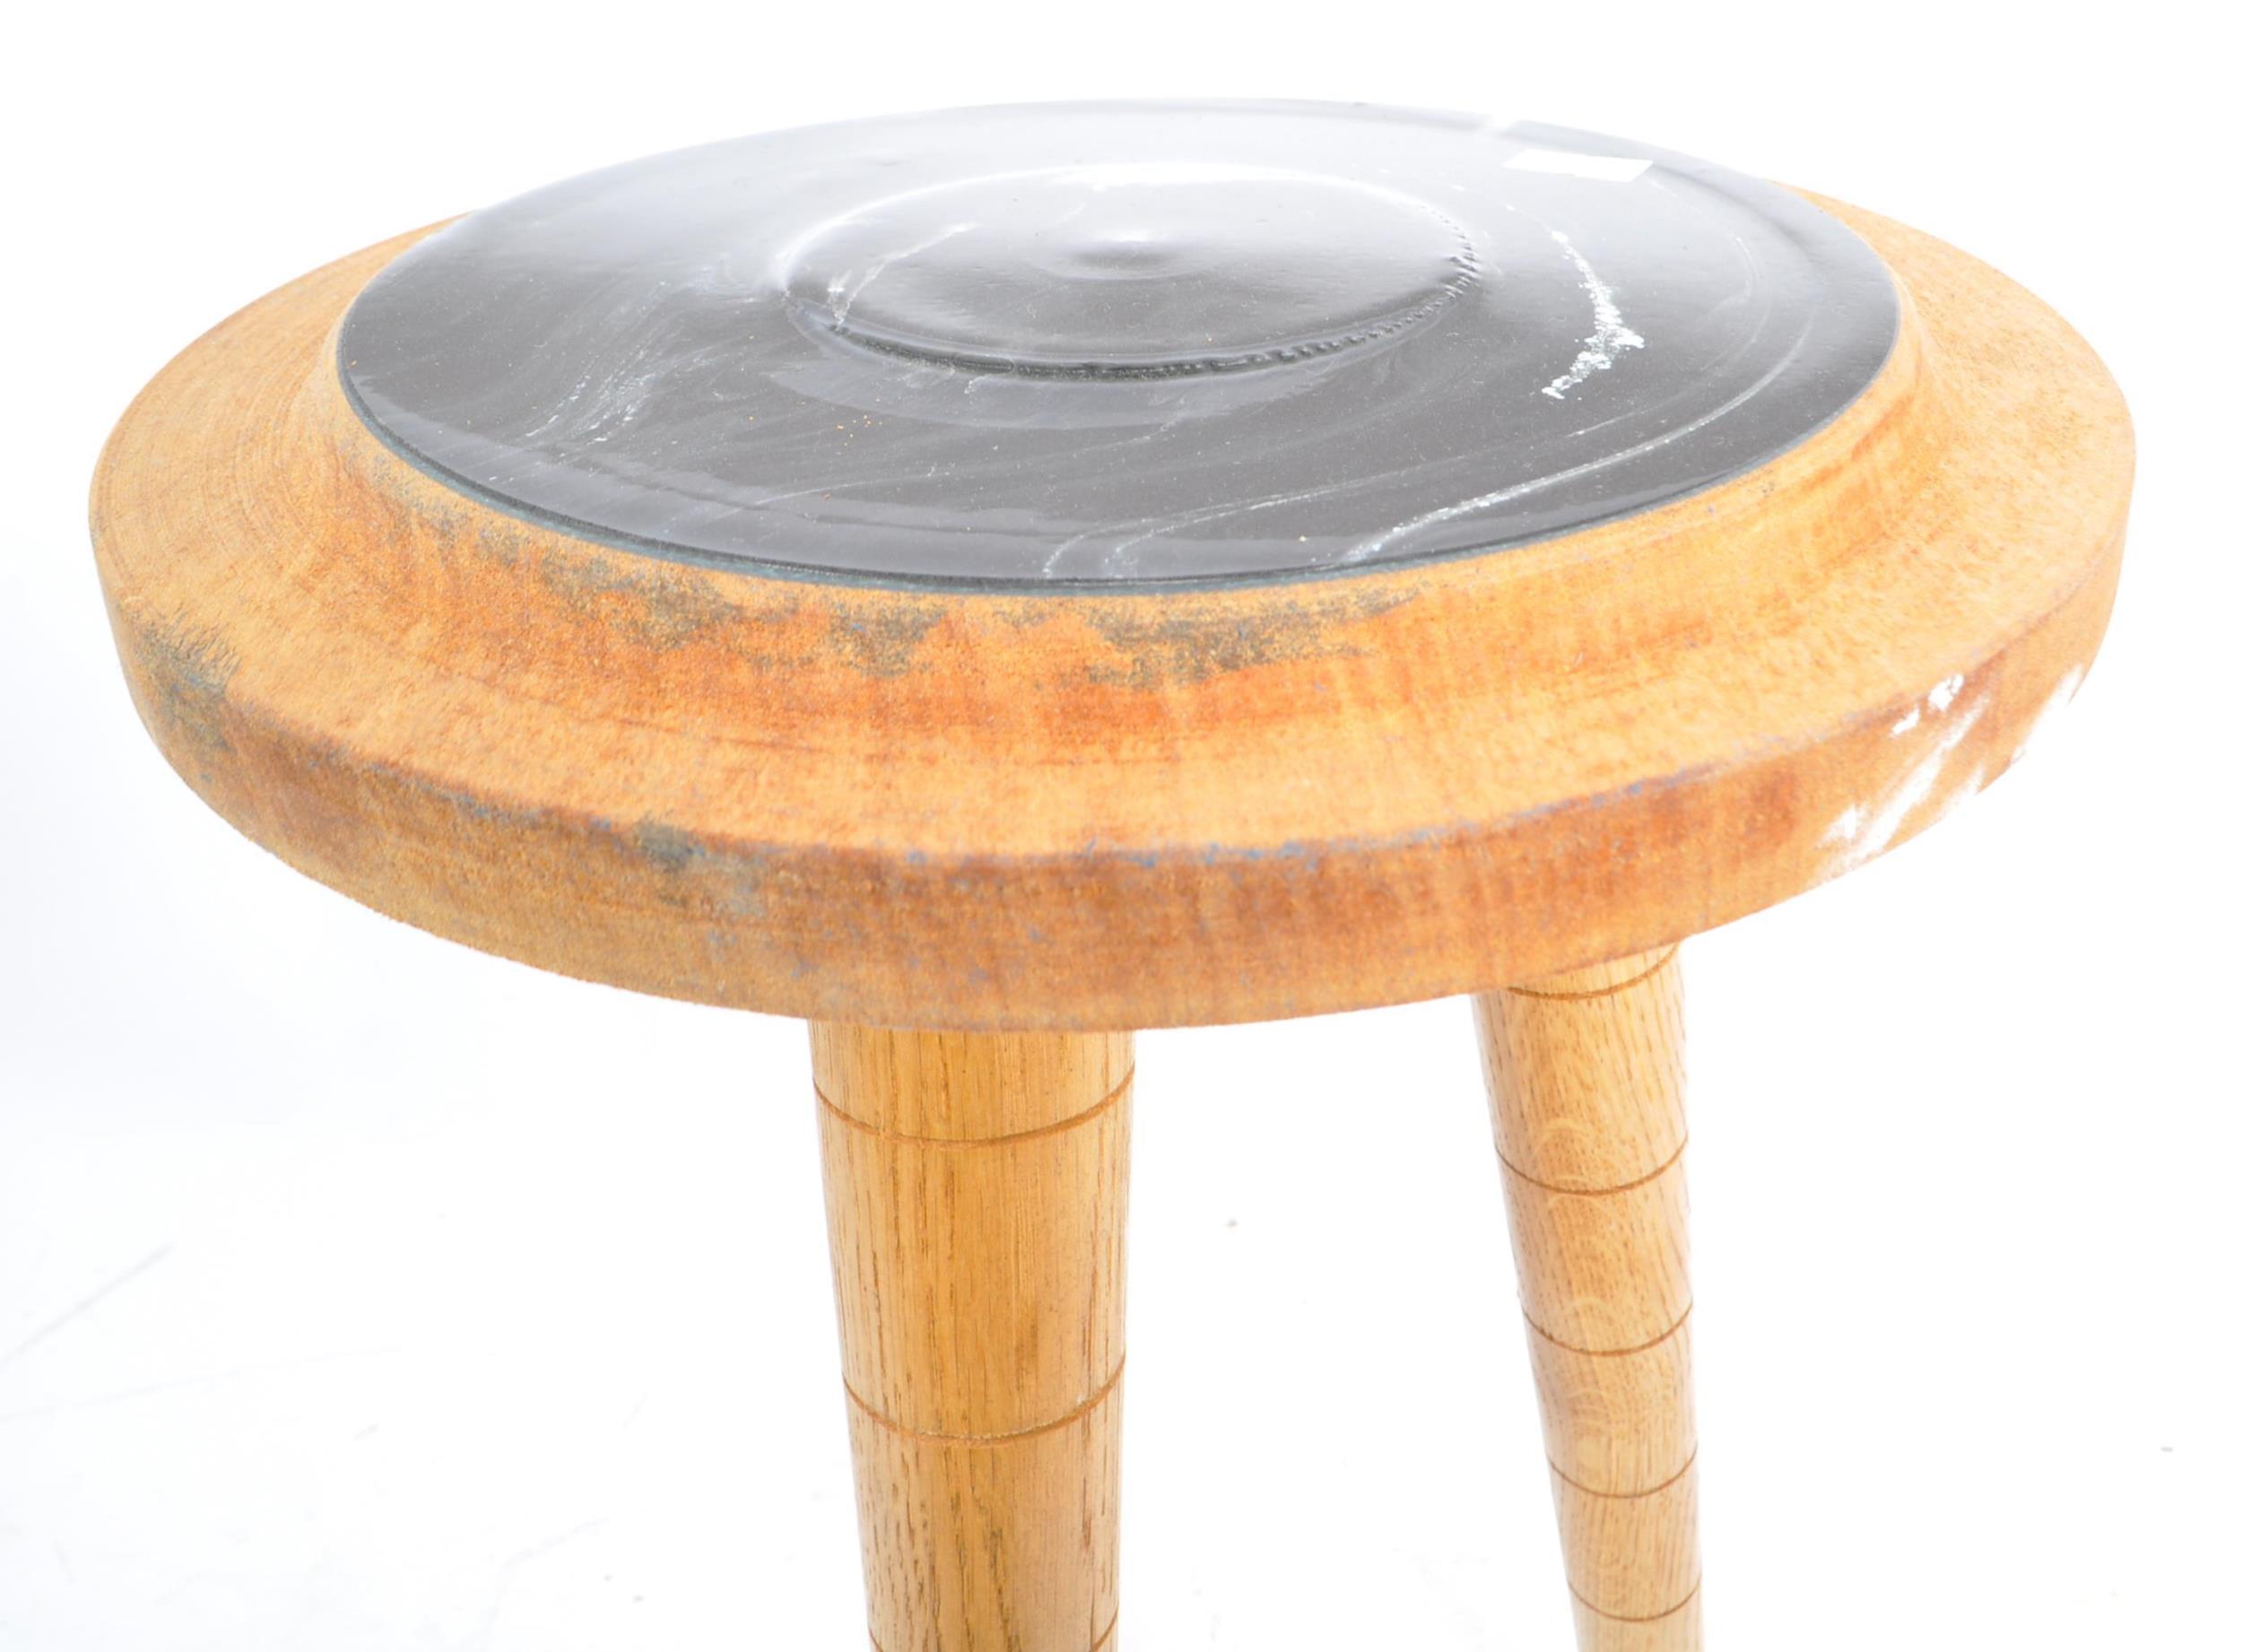 CONTEMPORARY WOOD AND RESIN SIDE TABLE - Image 3 of 5